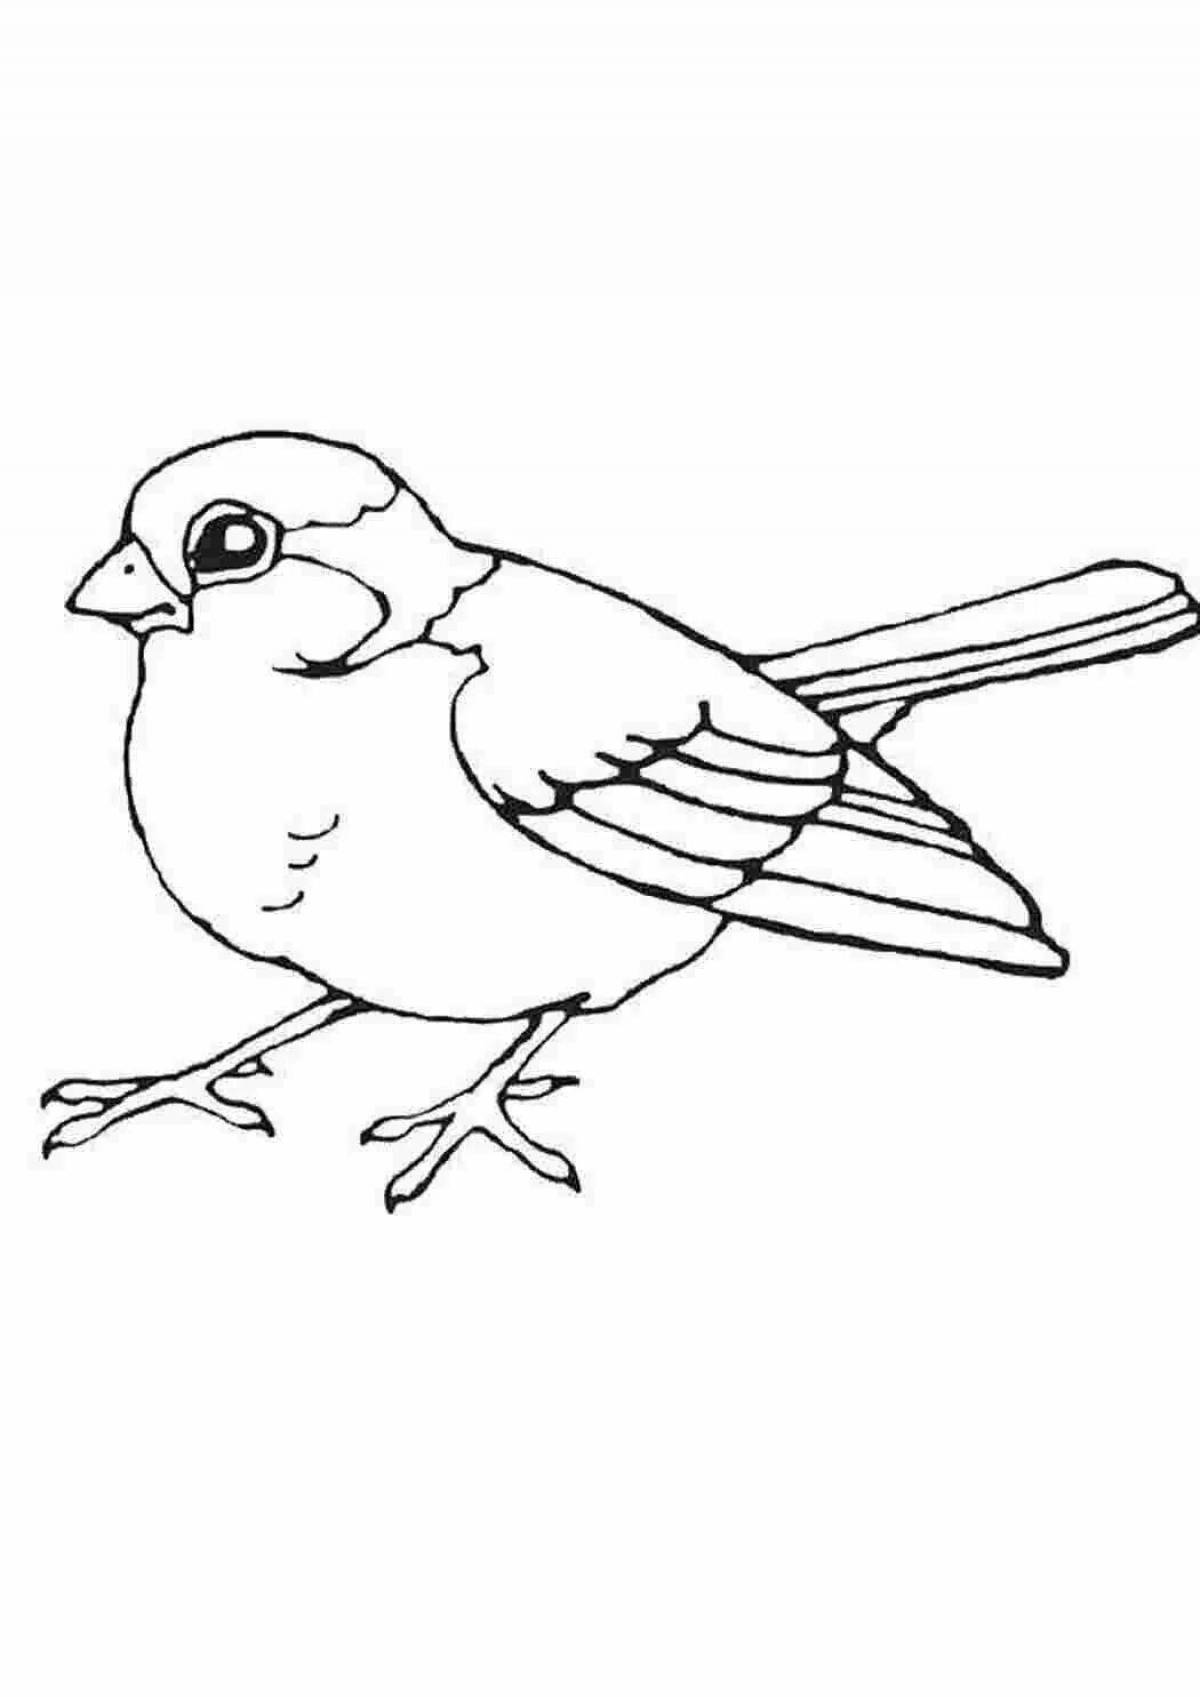 Coloring sparrow for kids